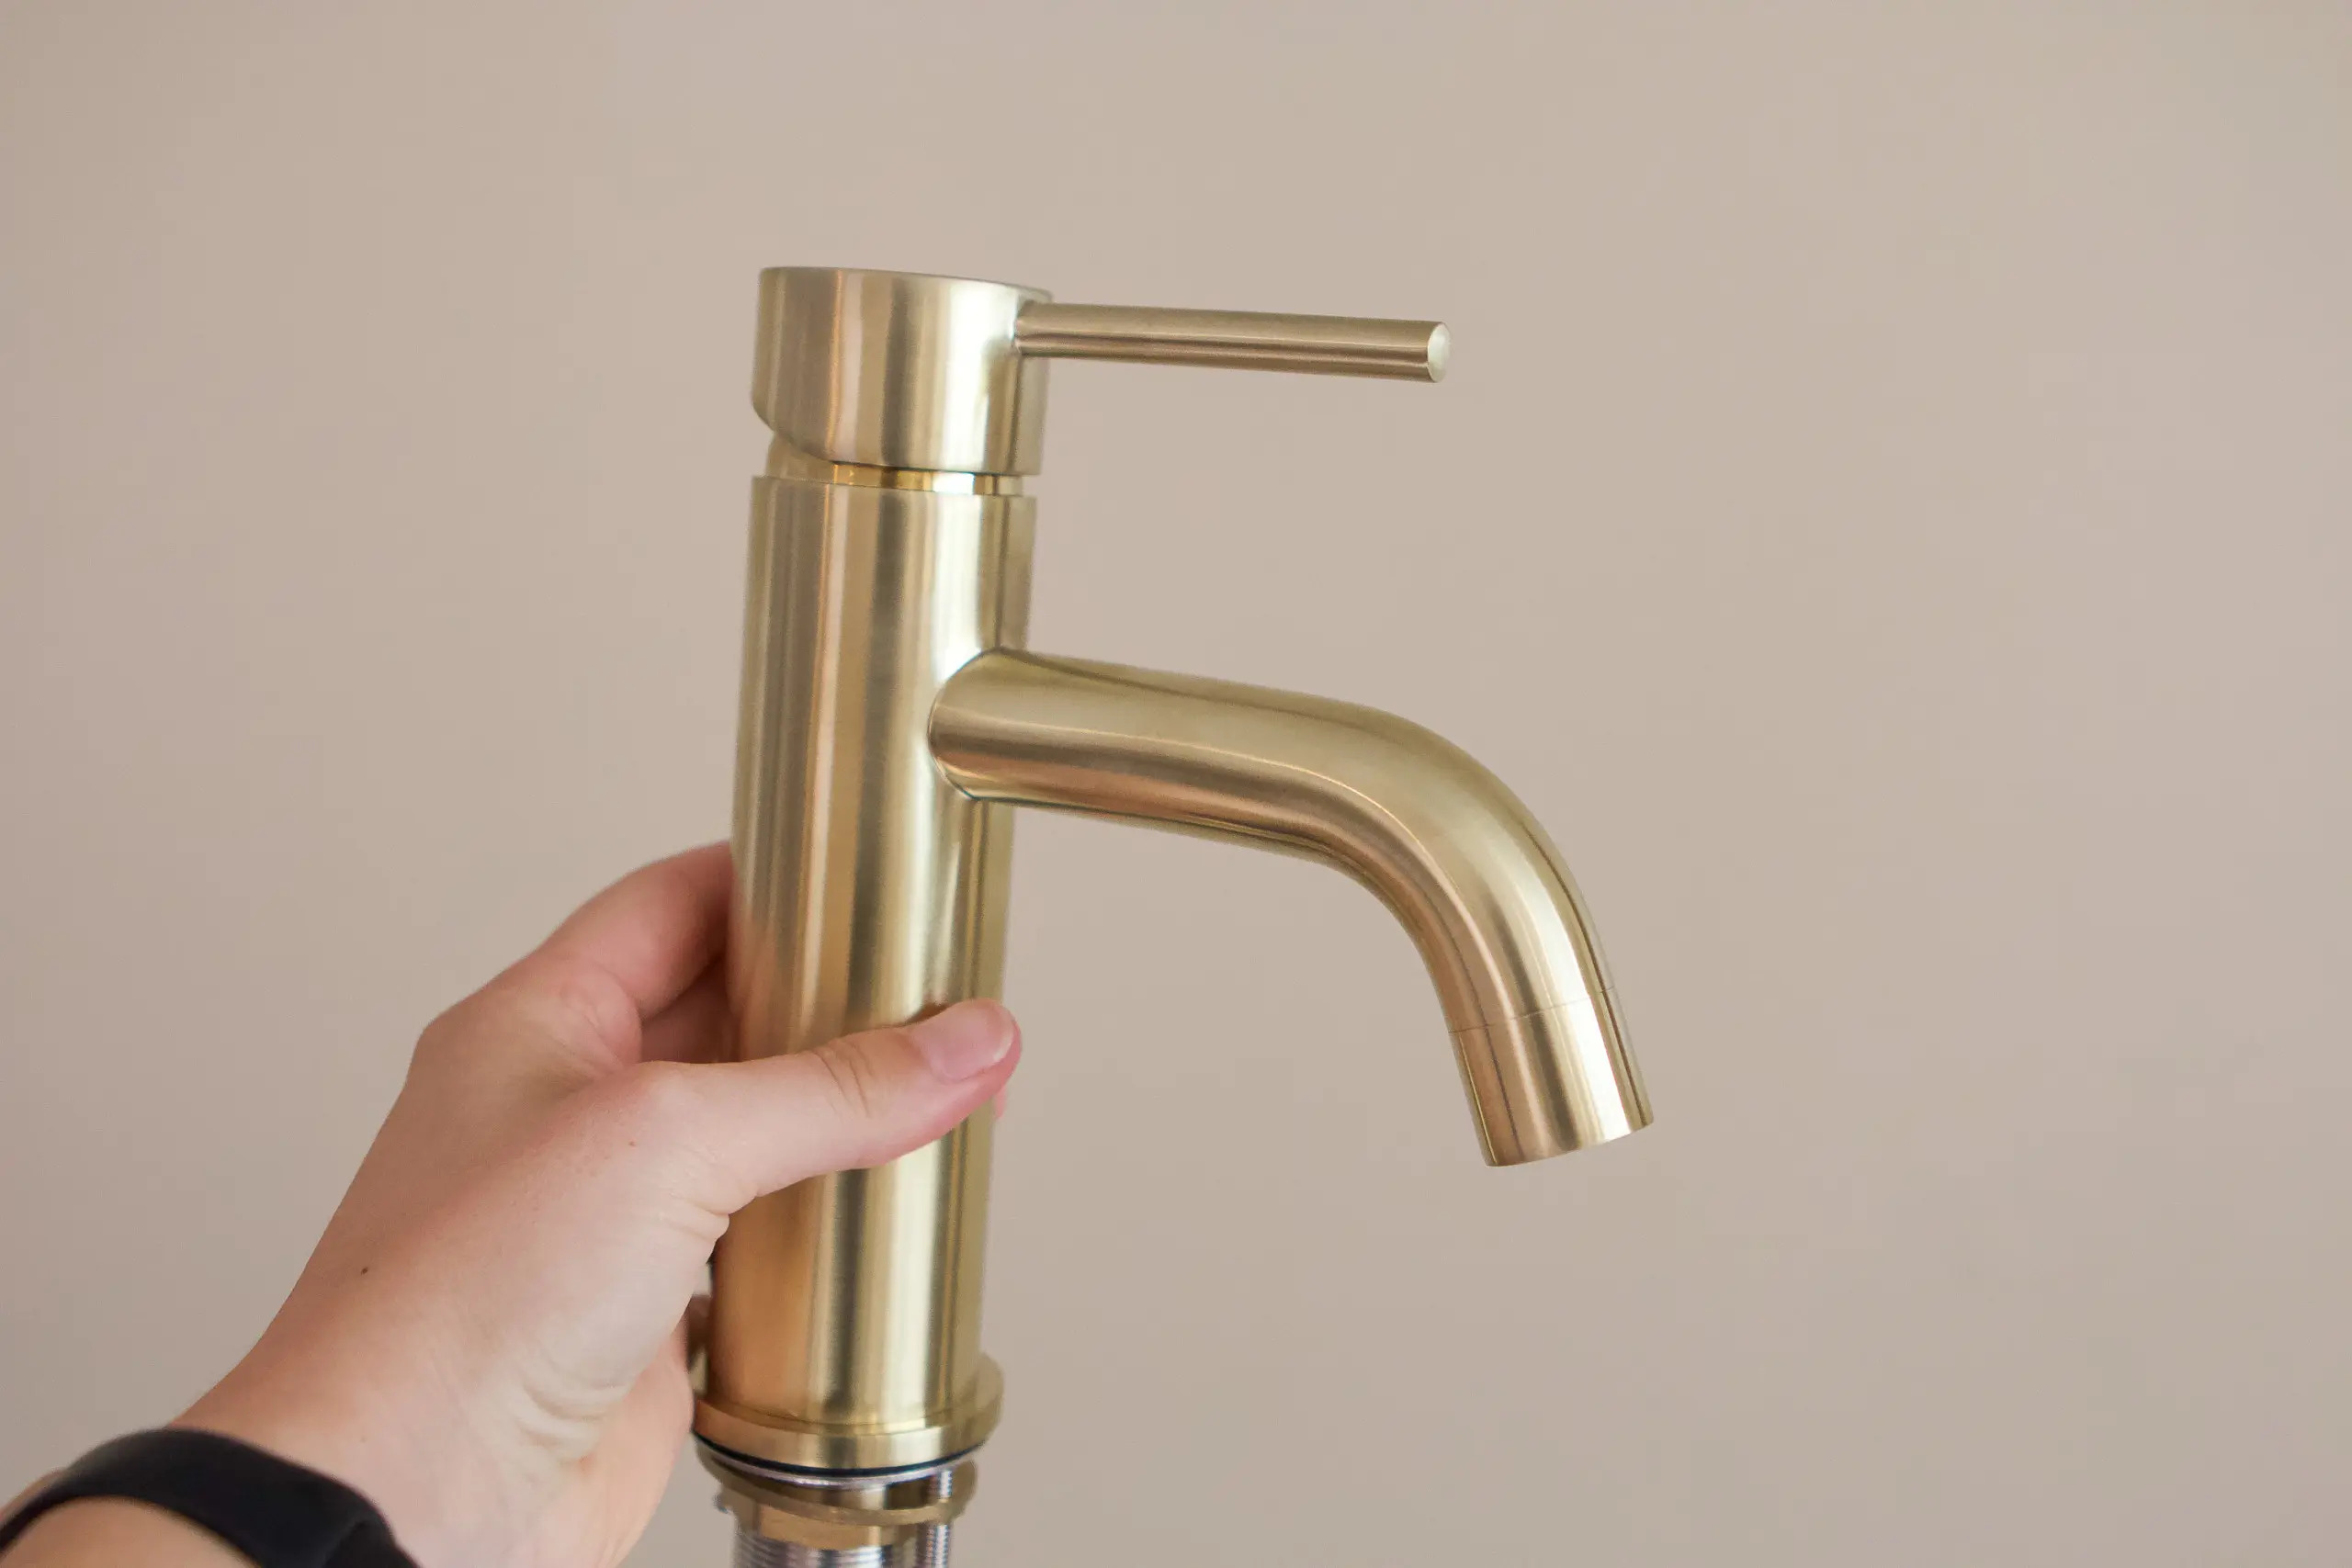 How To Install A New Bathroom Faucet